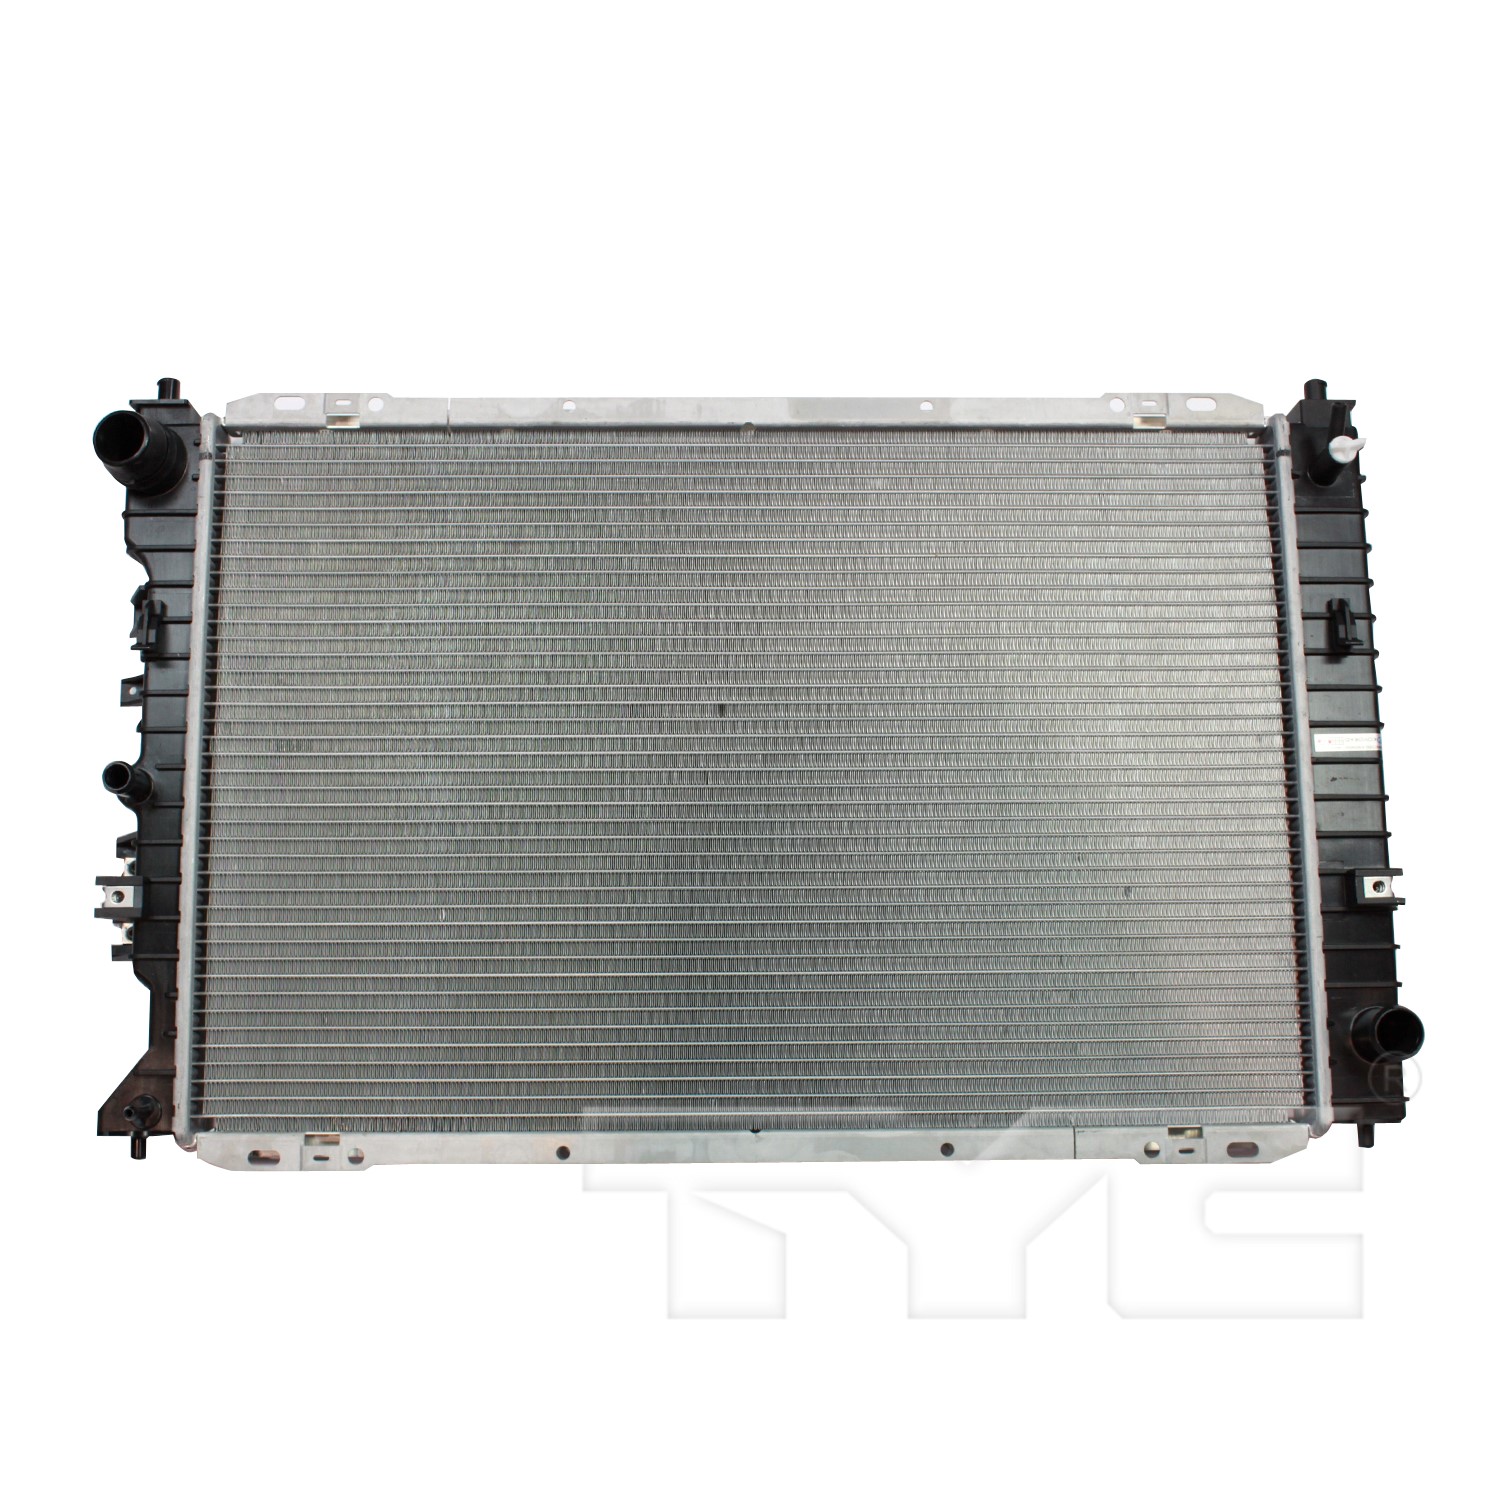 Aftermarket RADIATORS for FORD - ESCAPE, ESCAPE,10-12,Radiator assembly